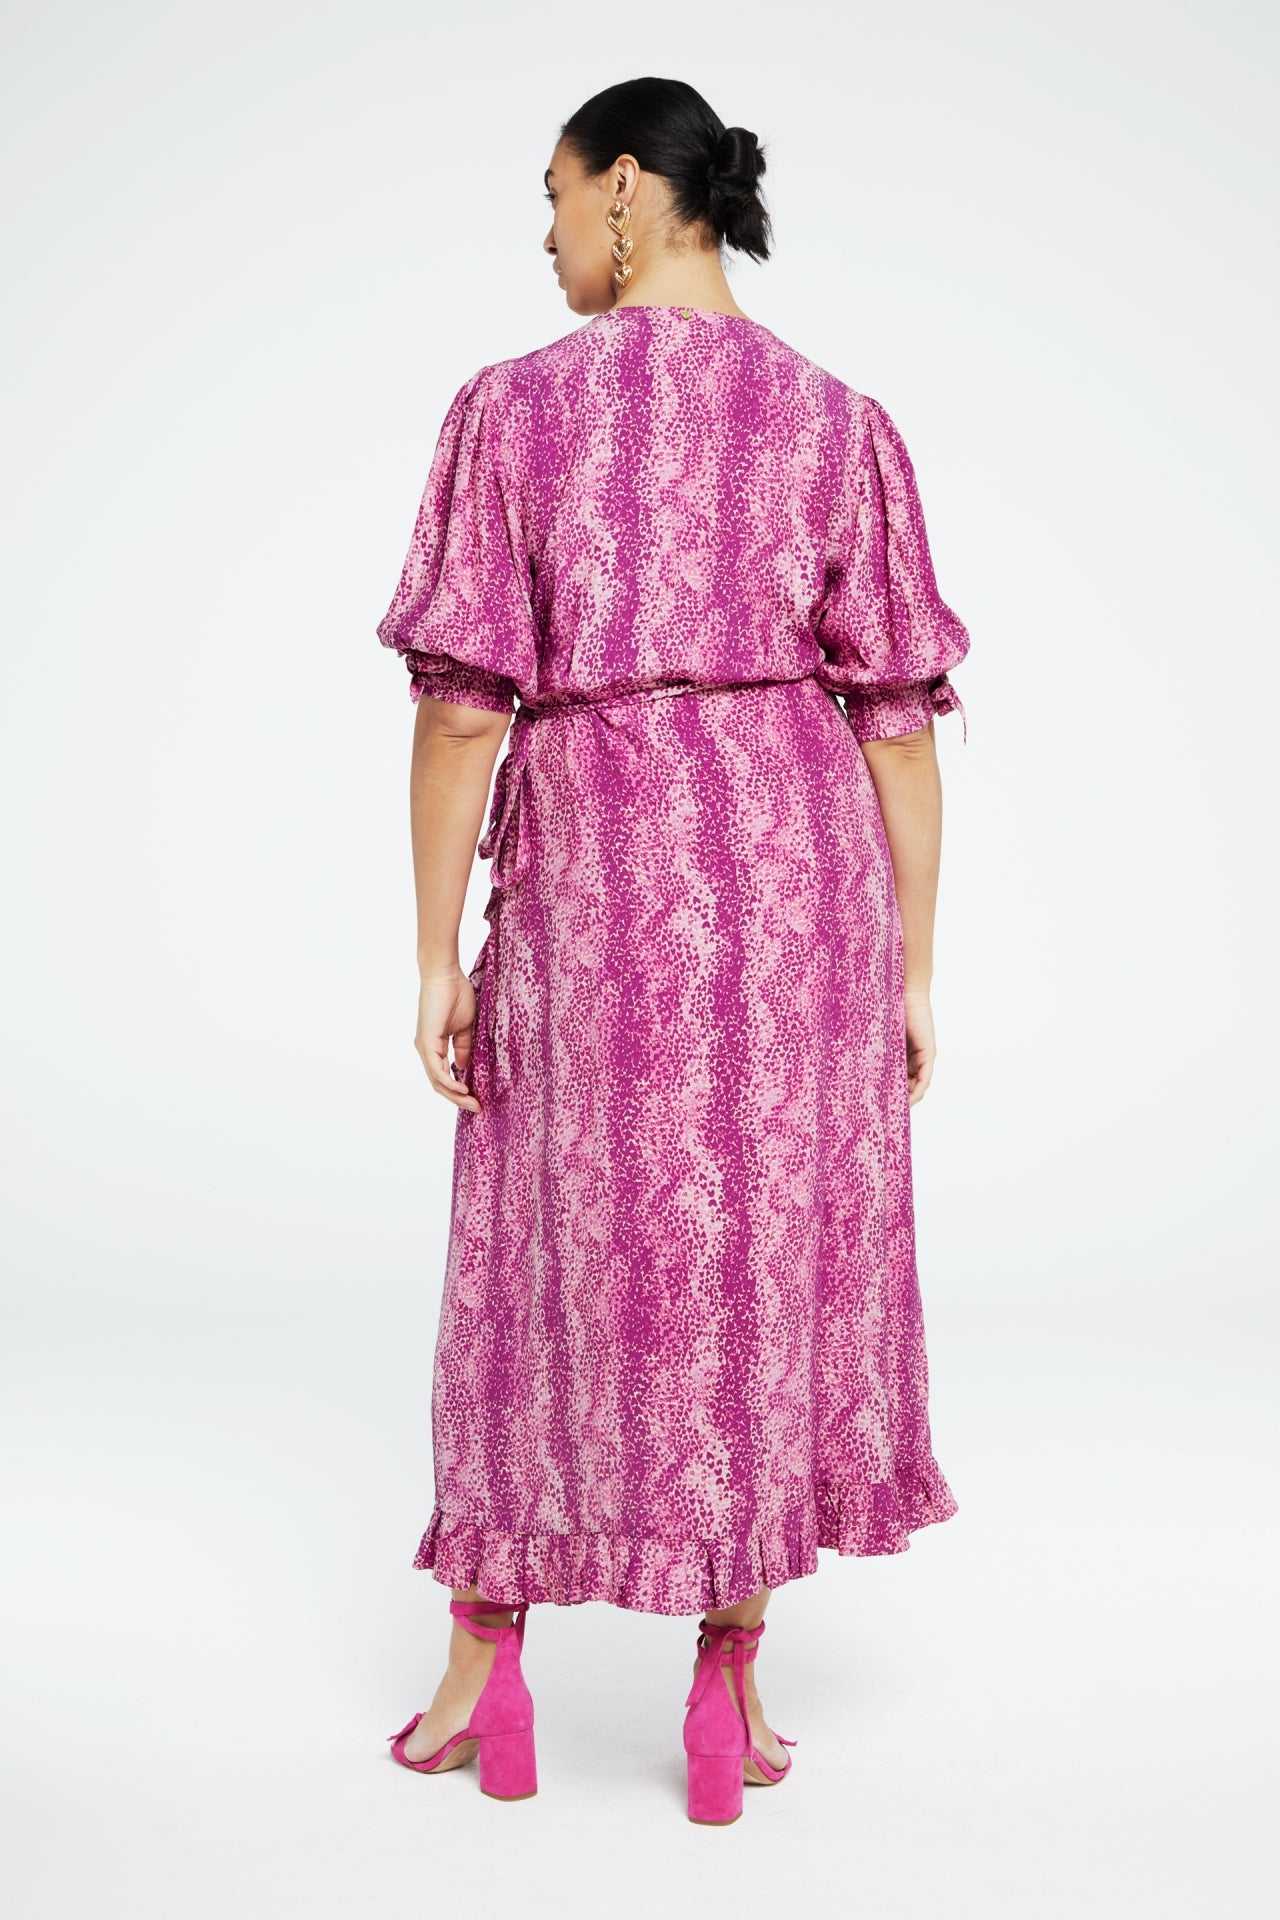 The back view of a woman wearing a Fabienne Chapot Channa Dress - Magic Magenta.